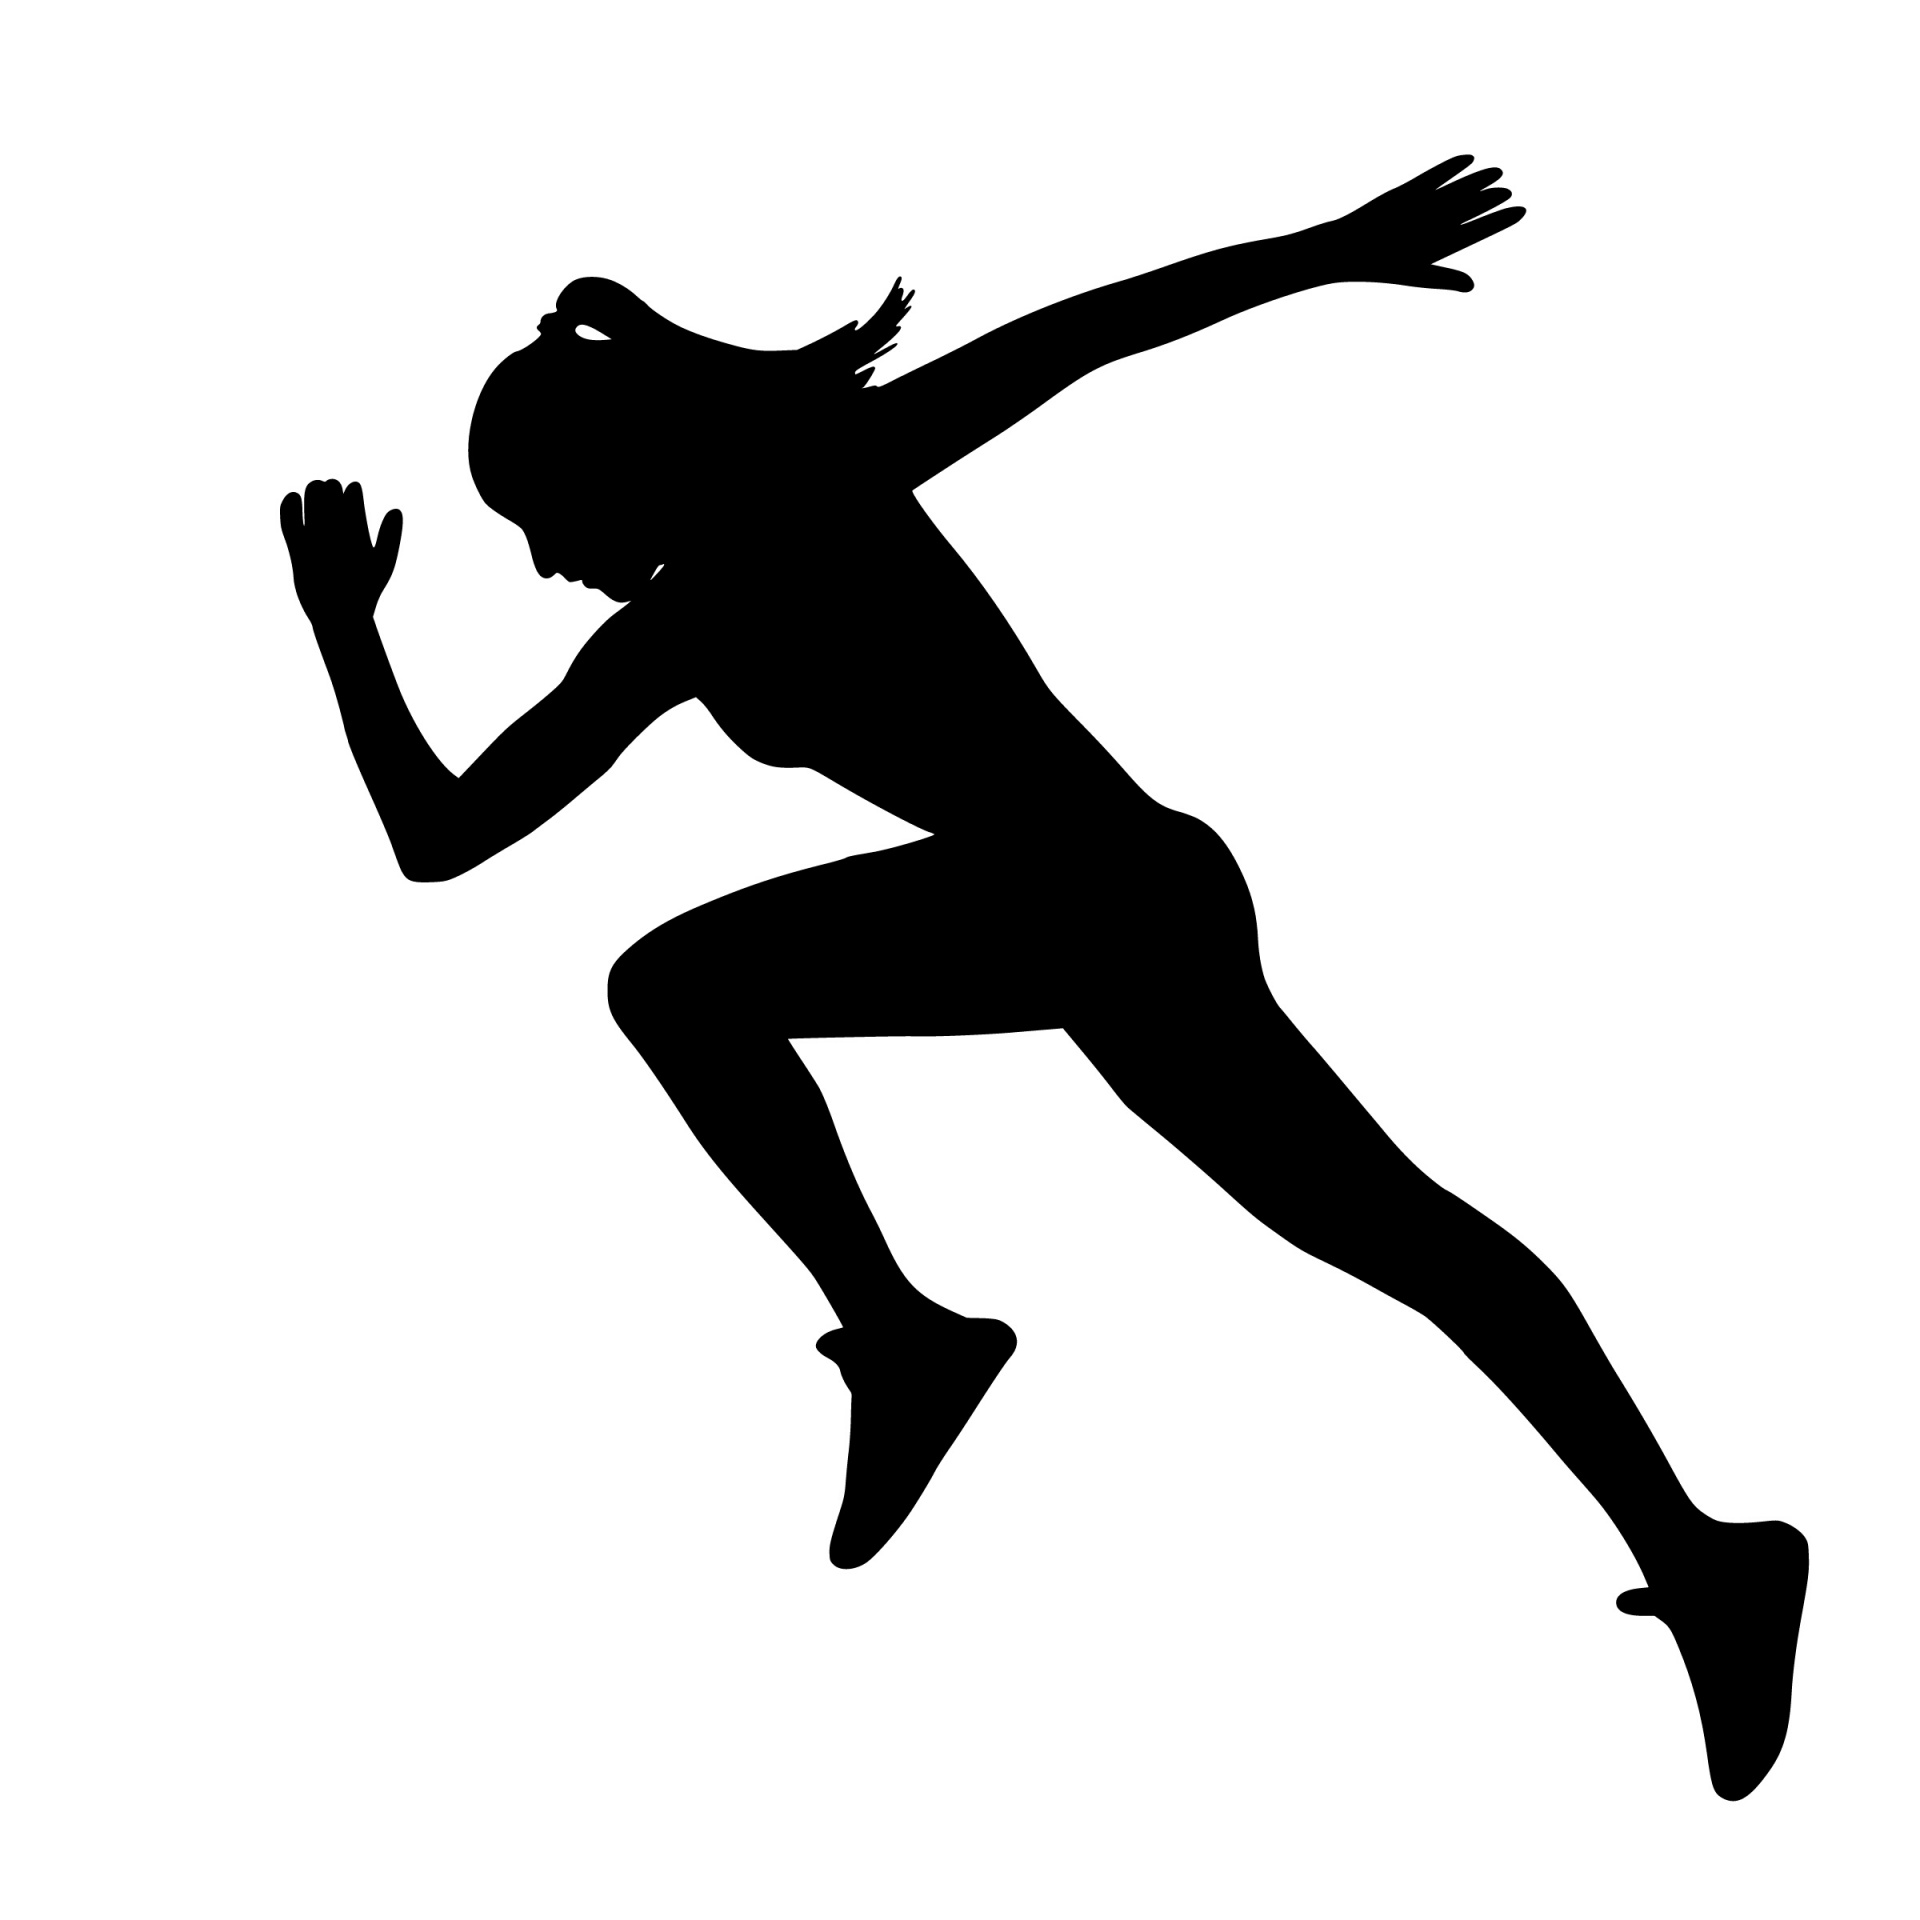 Silhouette, fit,run,gym,runner,workout,woman,dynamic,sprinter,training,energy,healthy, lifestyle,strength